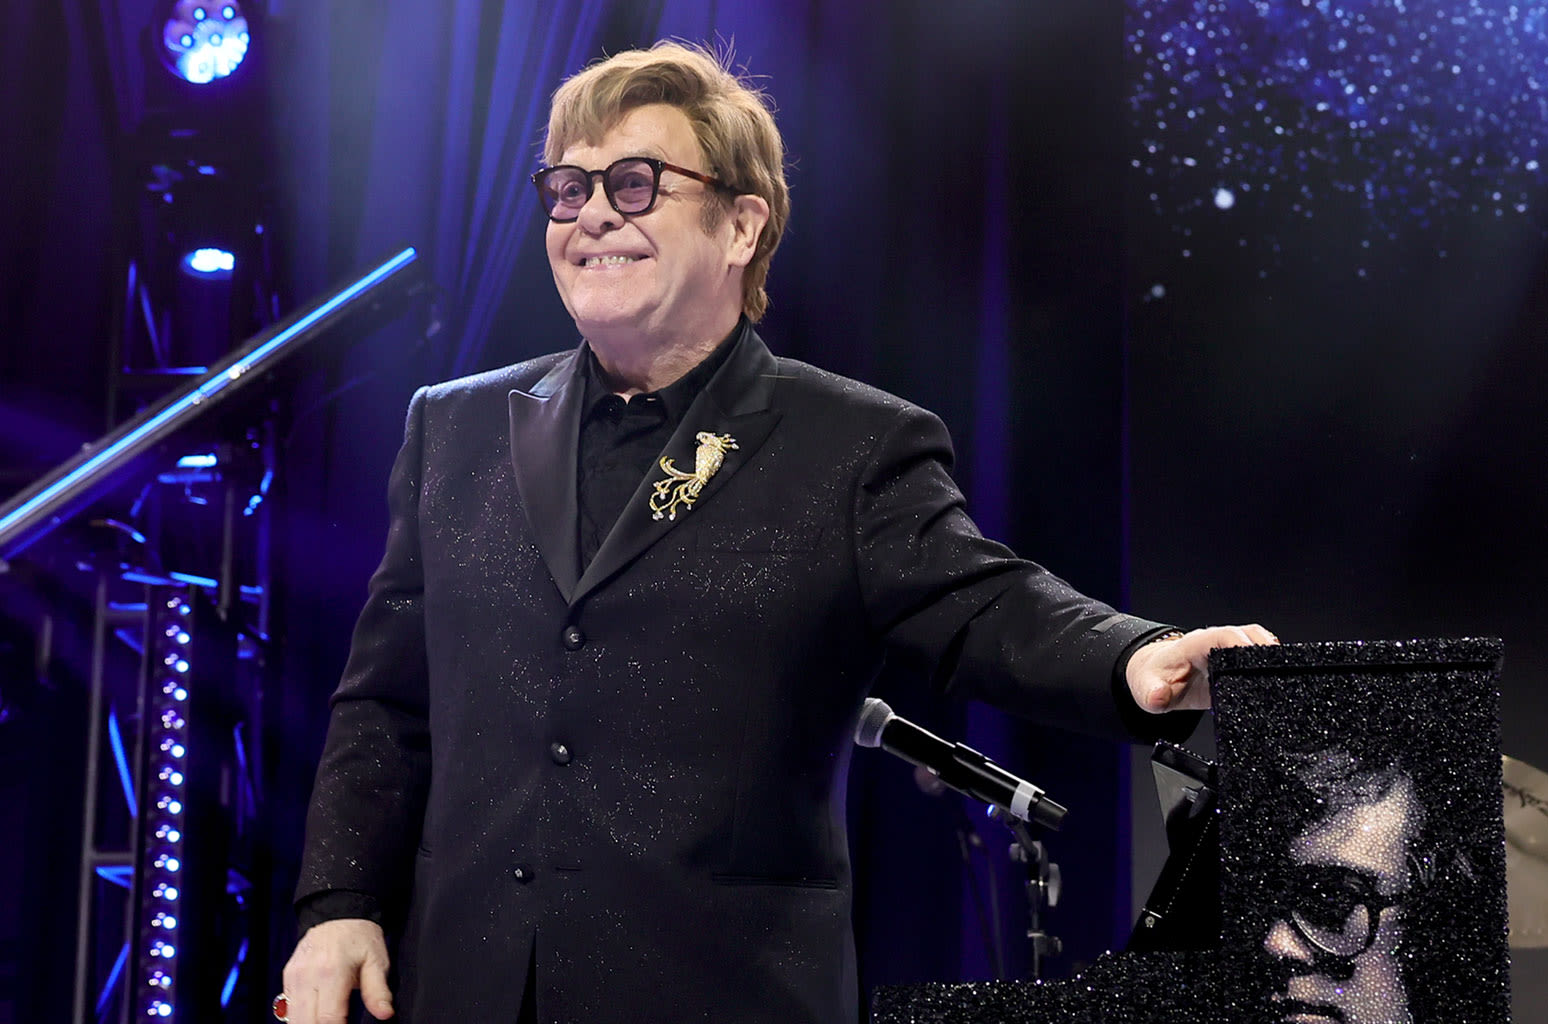 Elton John Launches Campaign Against LGBTQ+ Discrimination, Challenges Fans to Take On ‘Your Song’